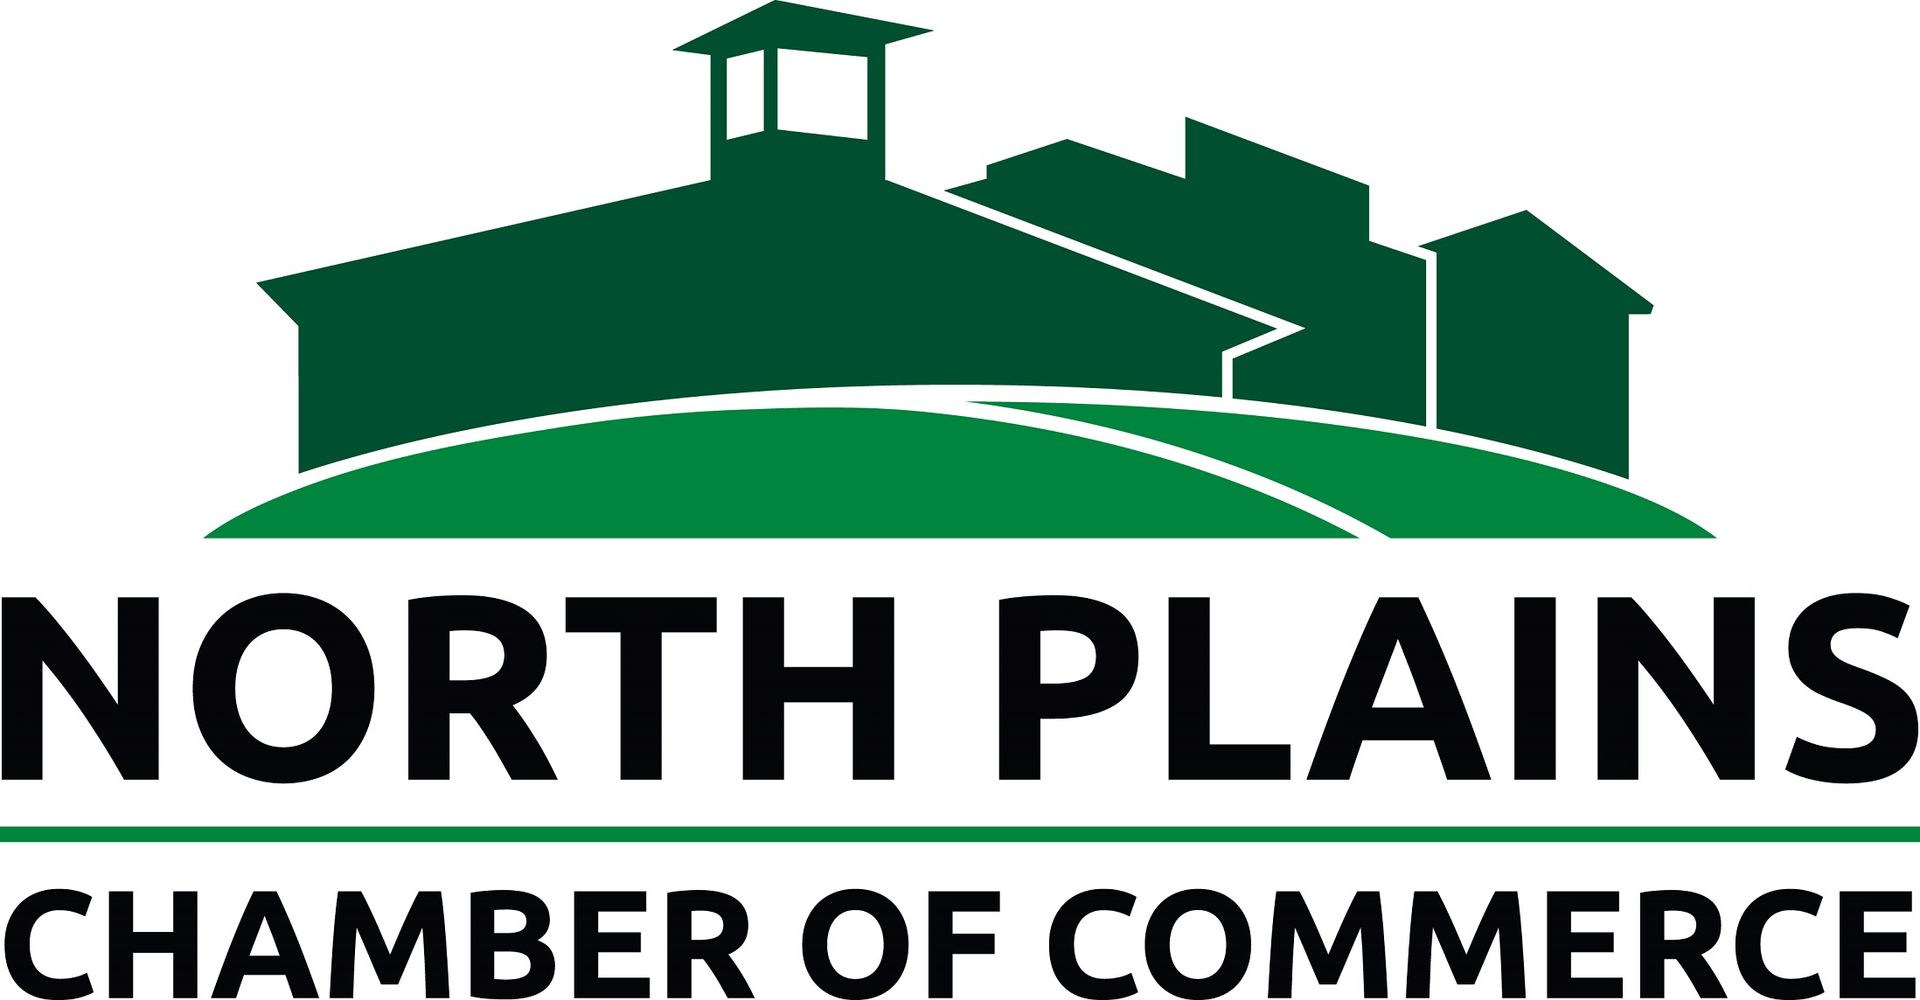 The north plains chamber of commerce logo has a green hill with houses on it.